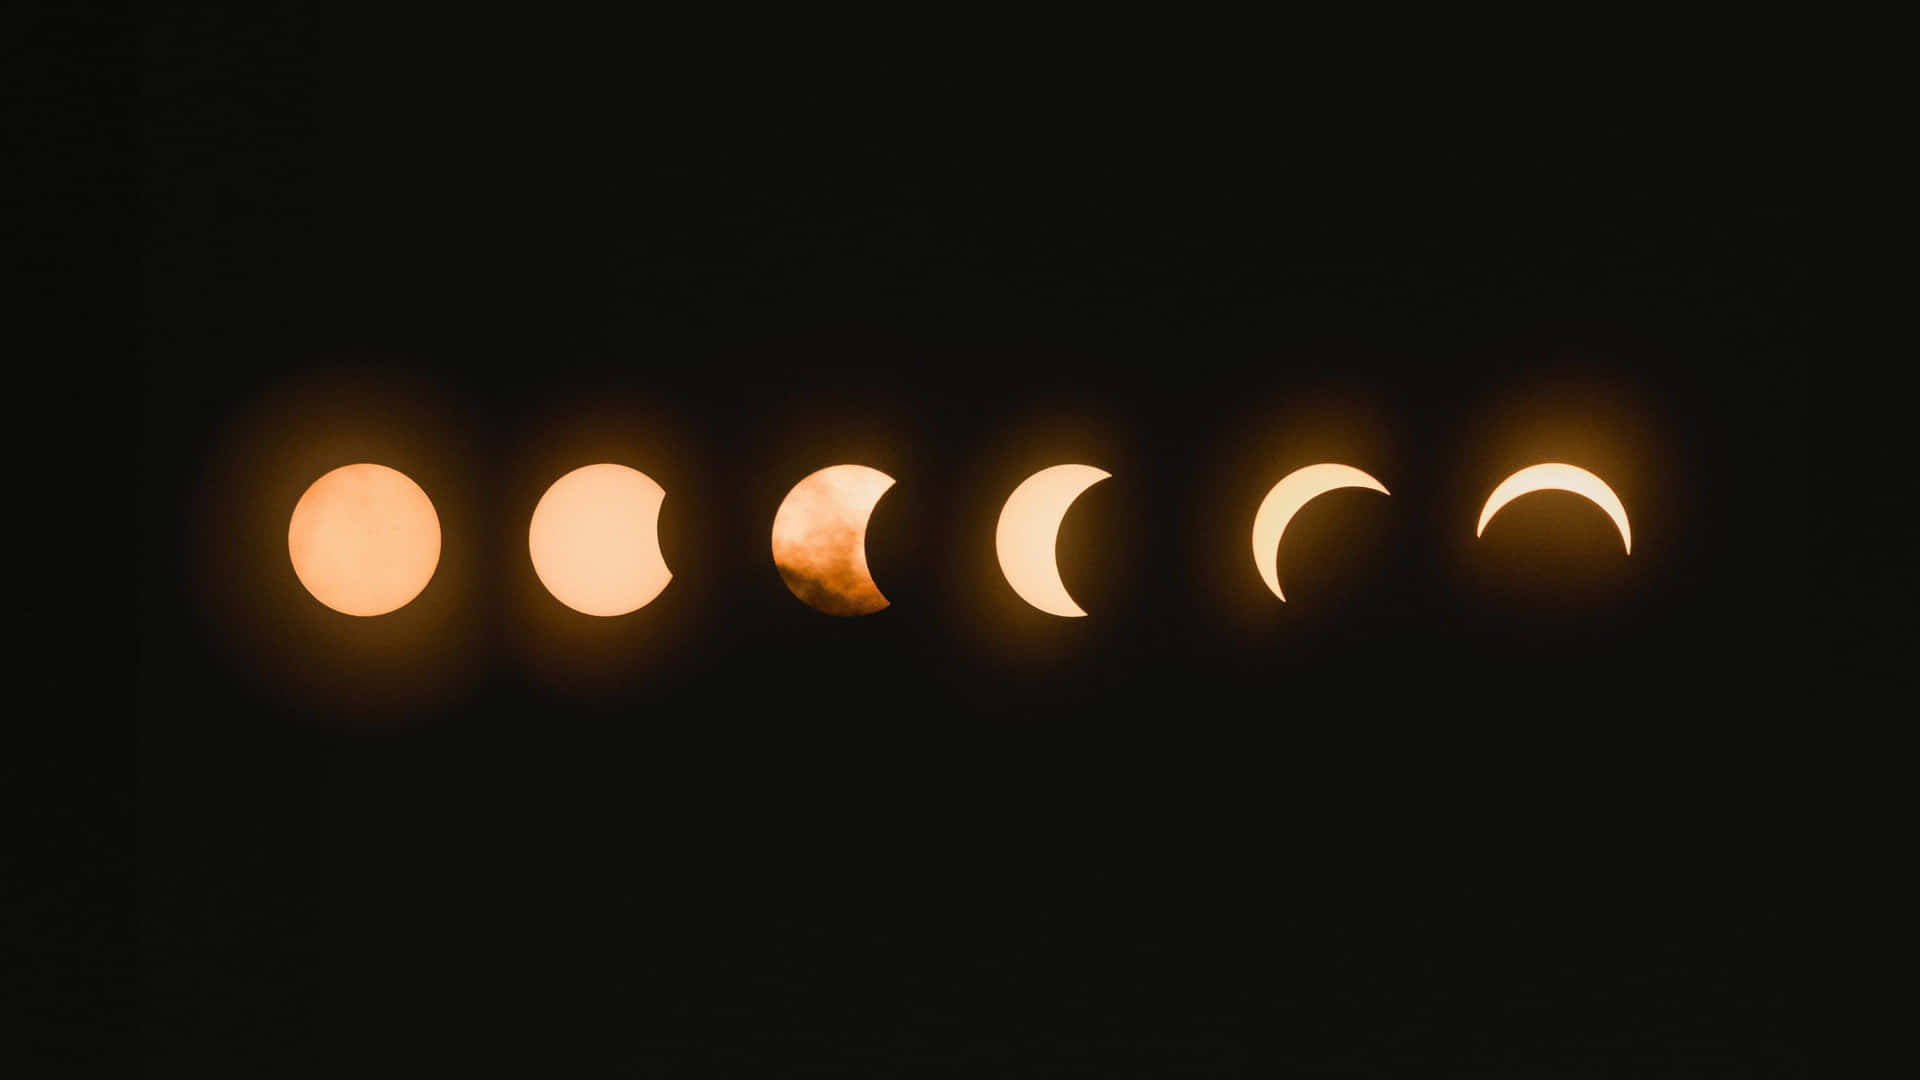 Stunning Moon Phases Journey in High Resolution